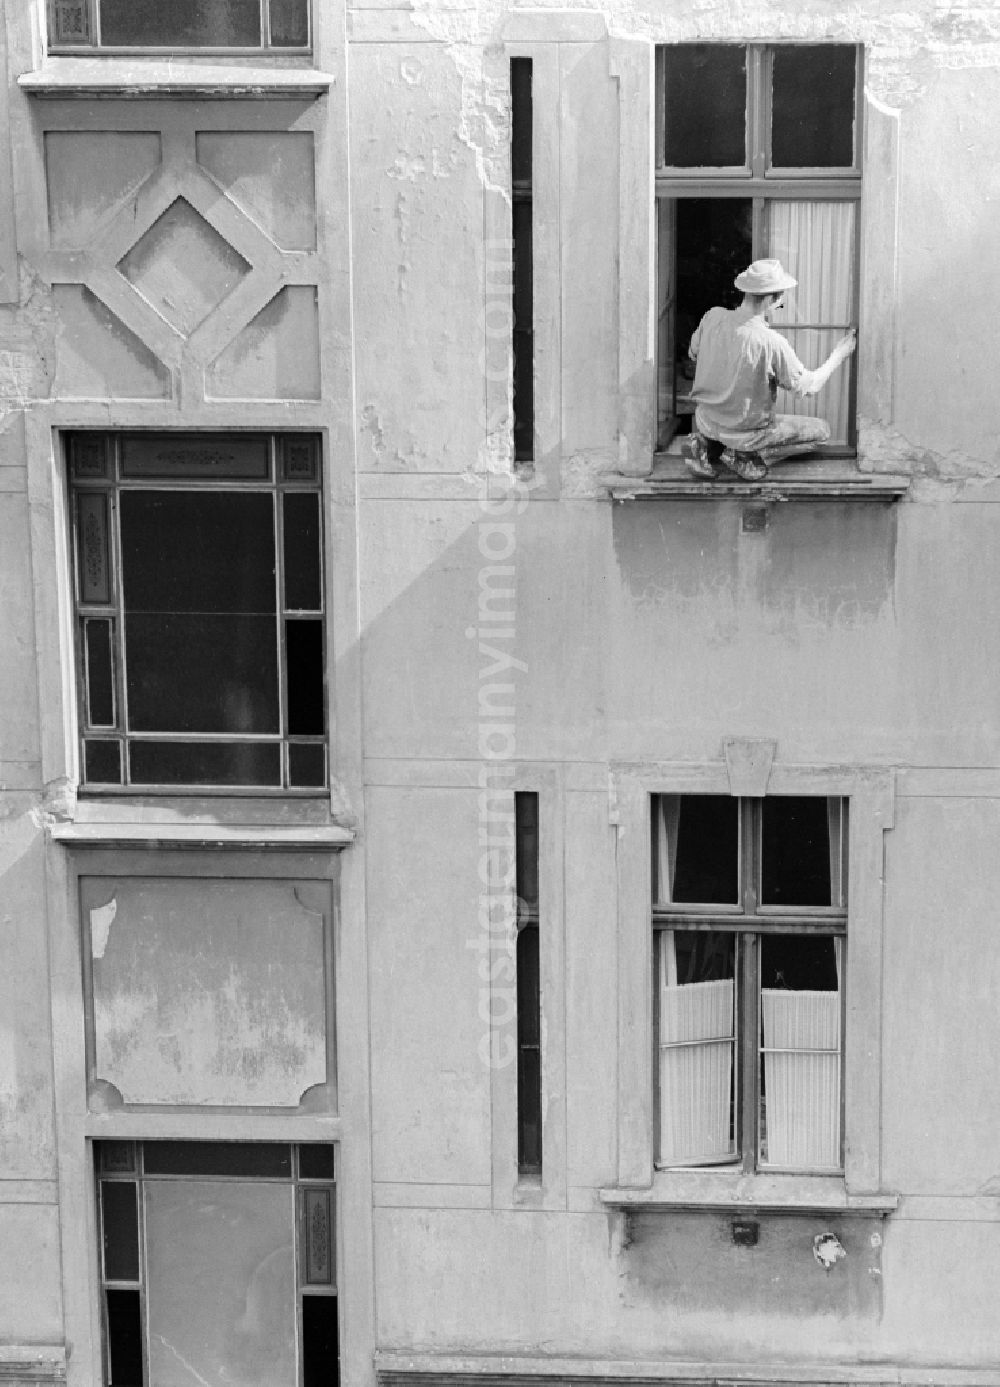 GDR picture archive: Berlin - A painter sweeps window in a backyard in Berlin, the former capital of the GDR, the German Democratic Republic